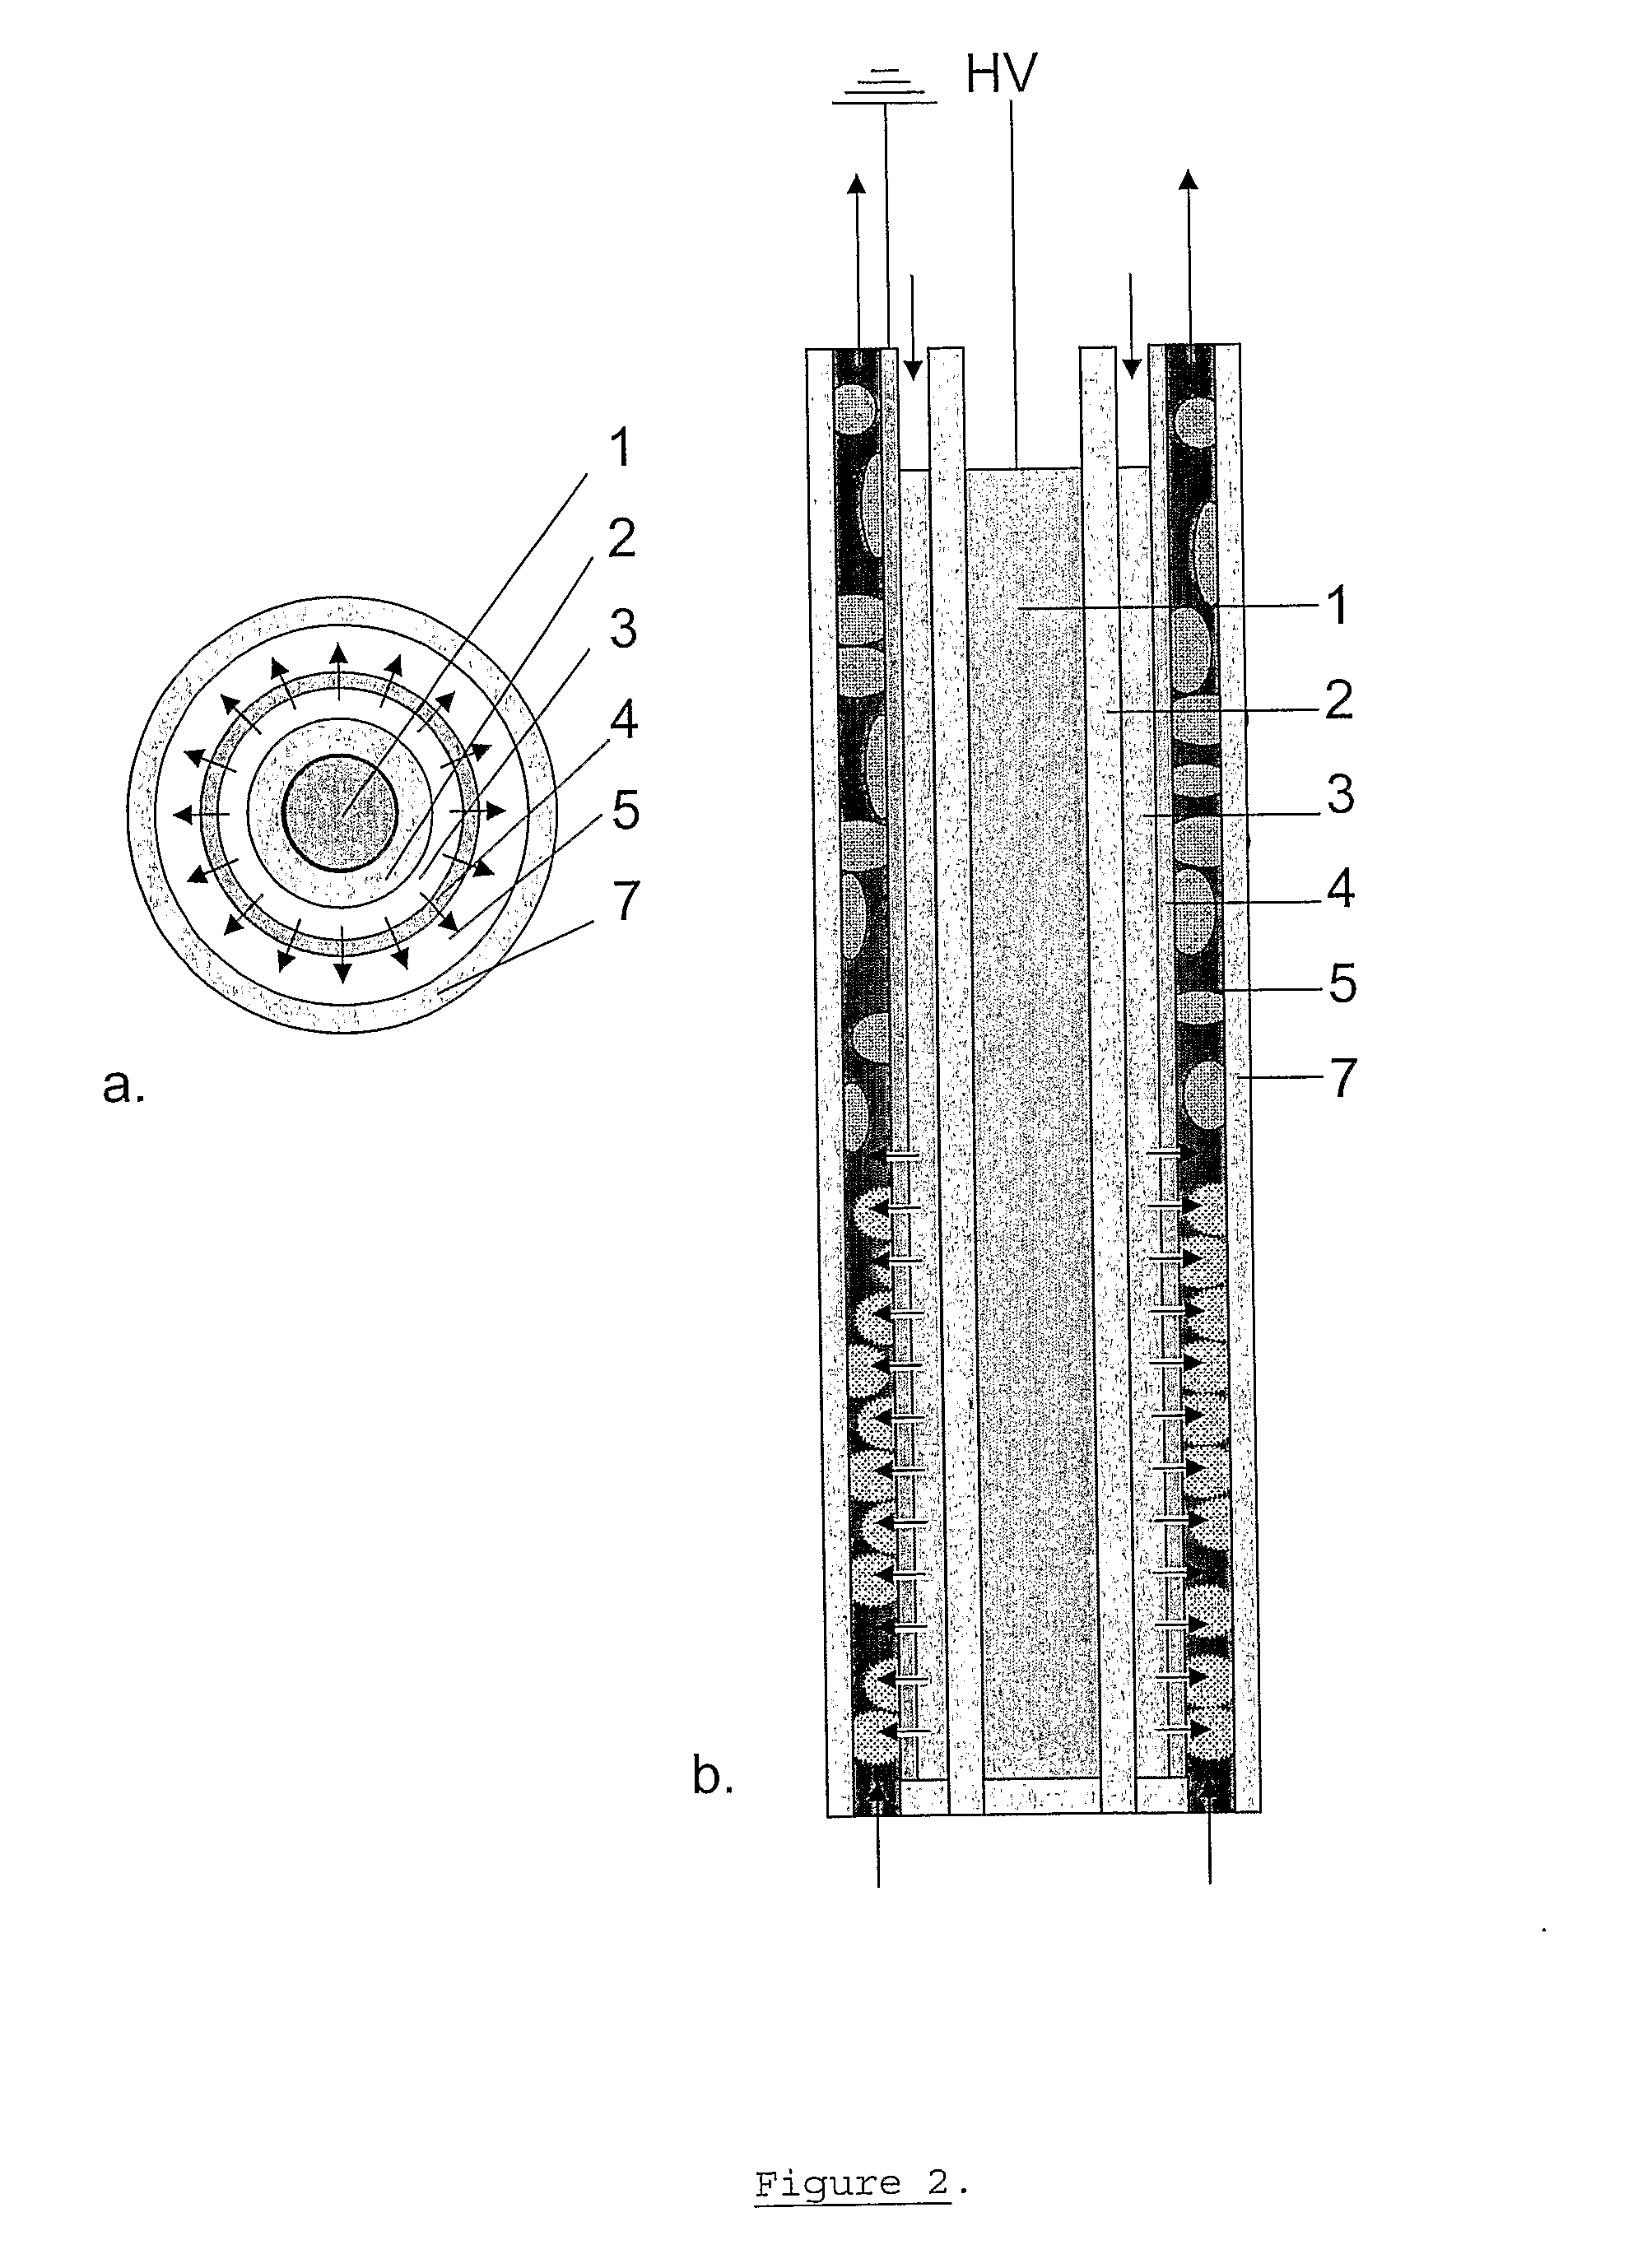 Apparatus and Method for Purification and Disinfection of Liquid, Solid or Gaseous Substances